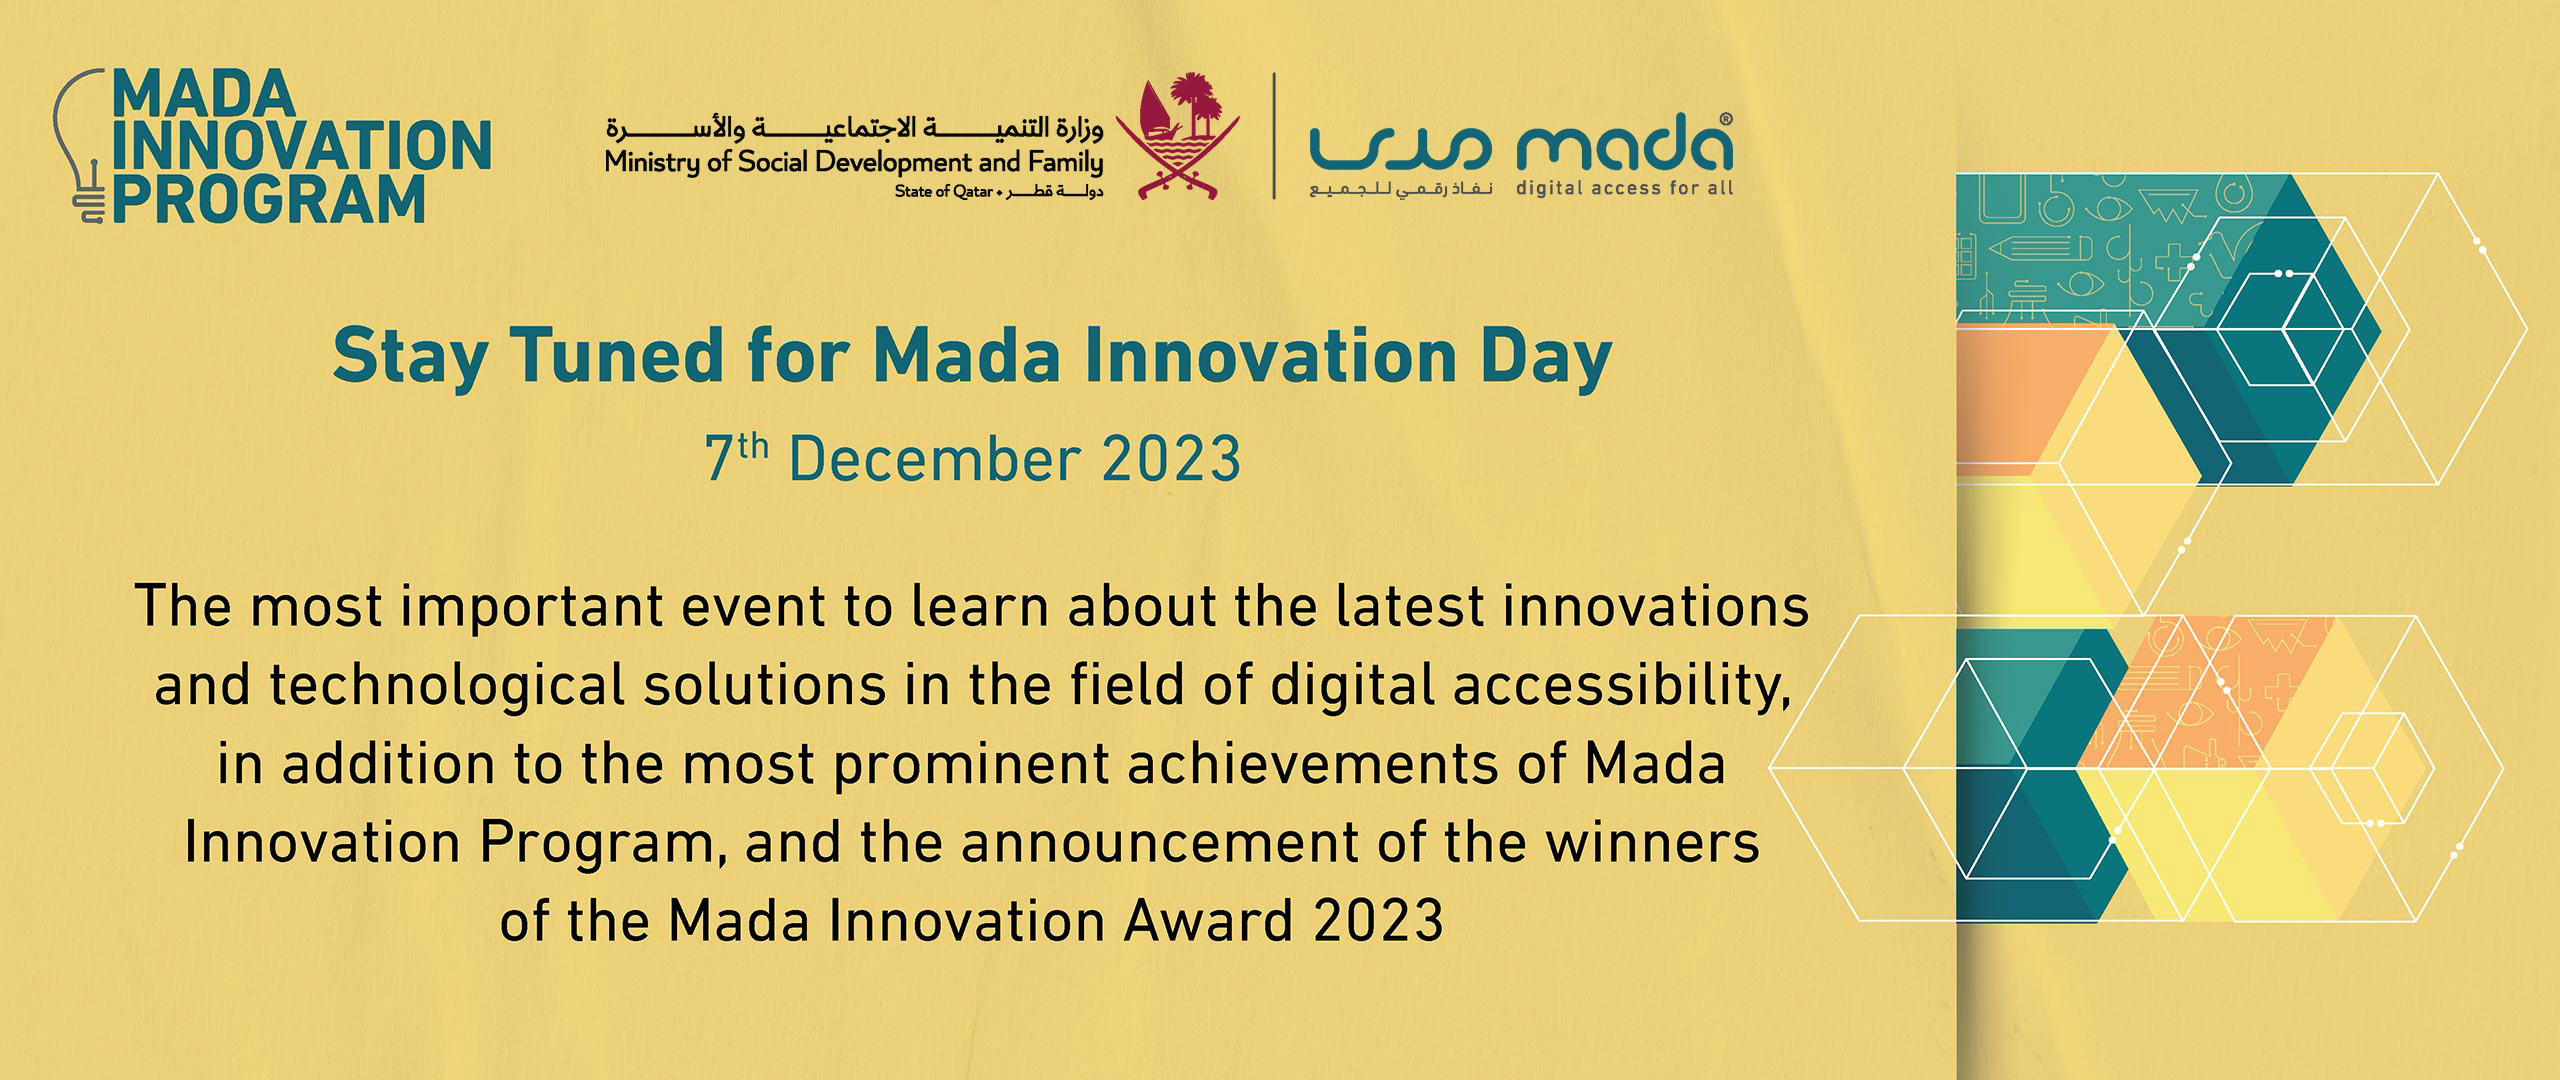 Stay Tuned for Mada Innovation Day